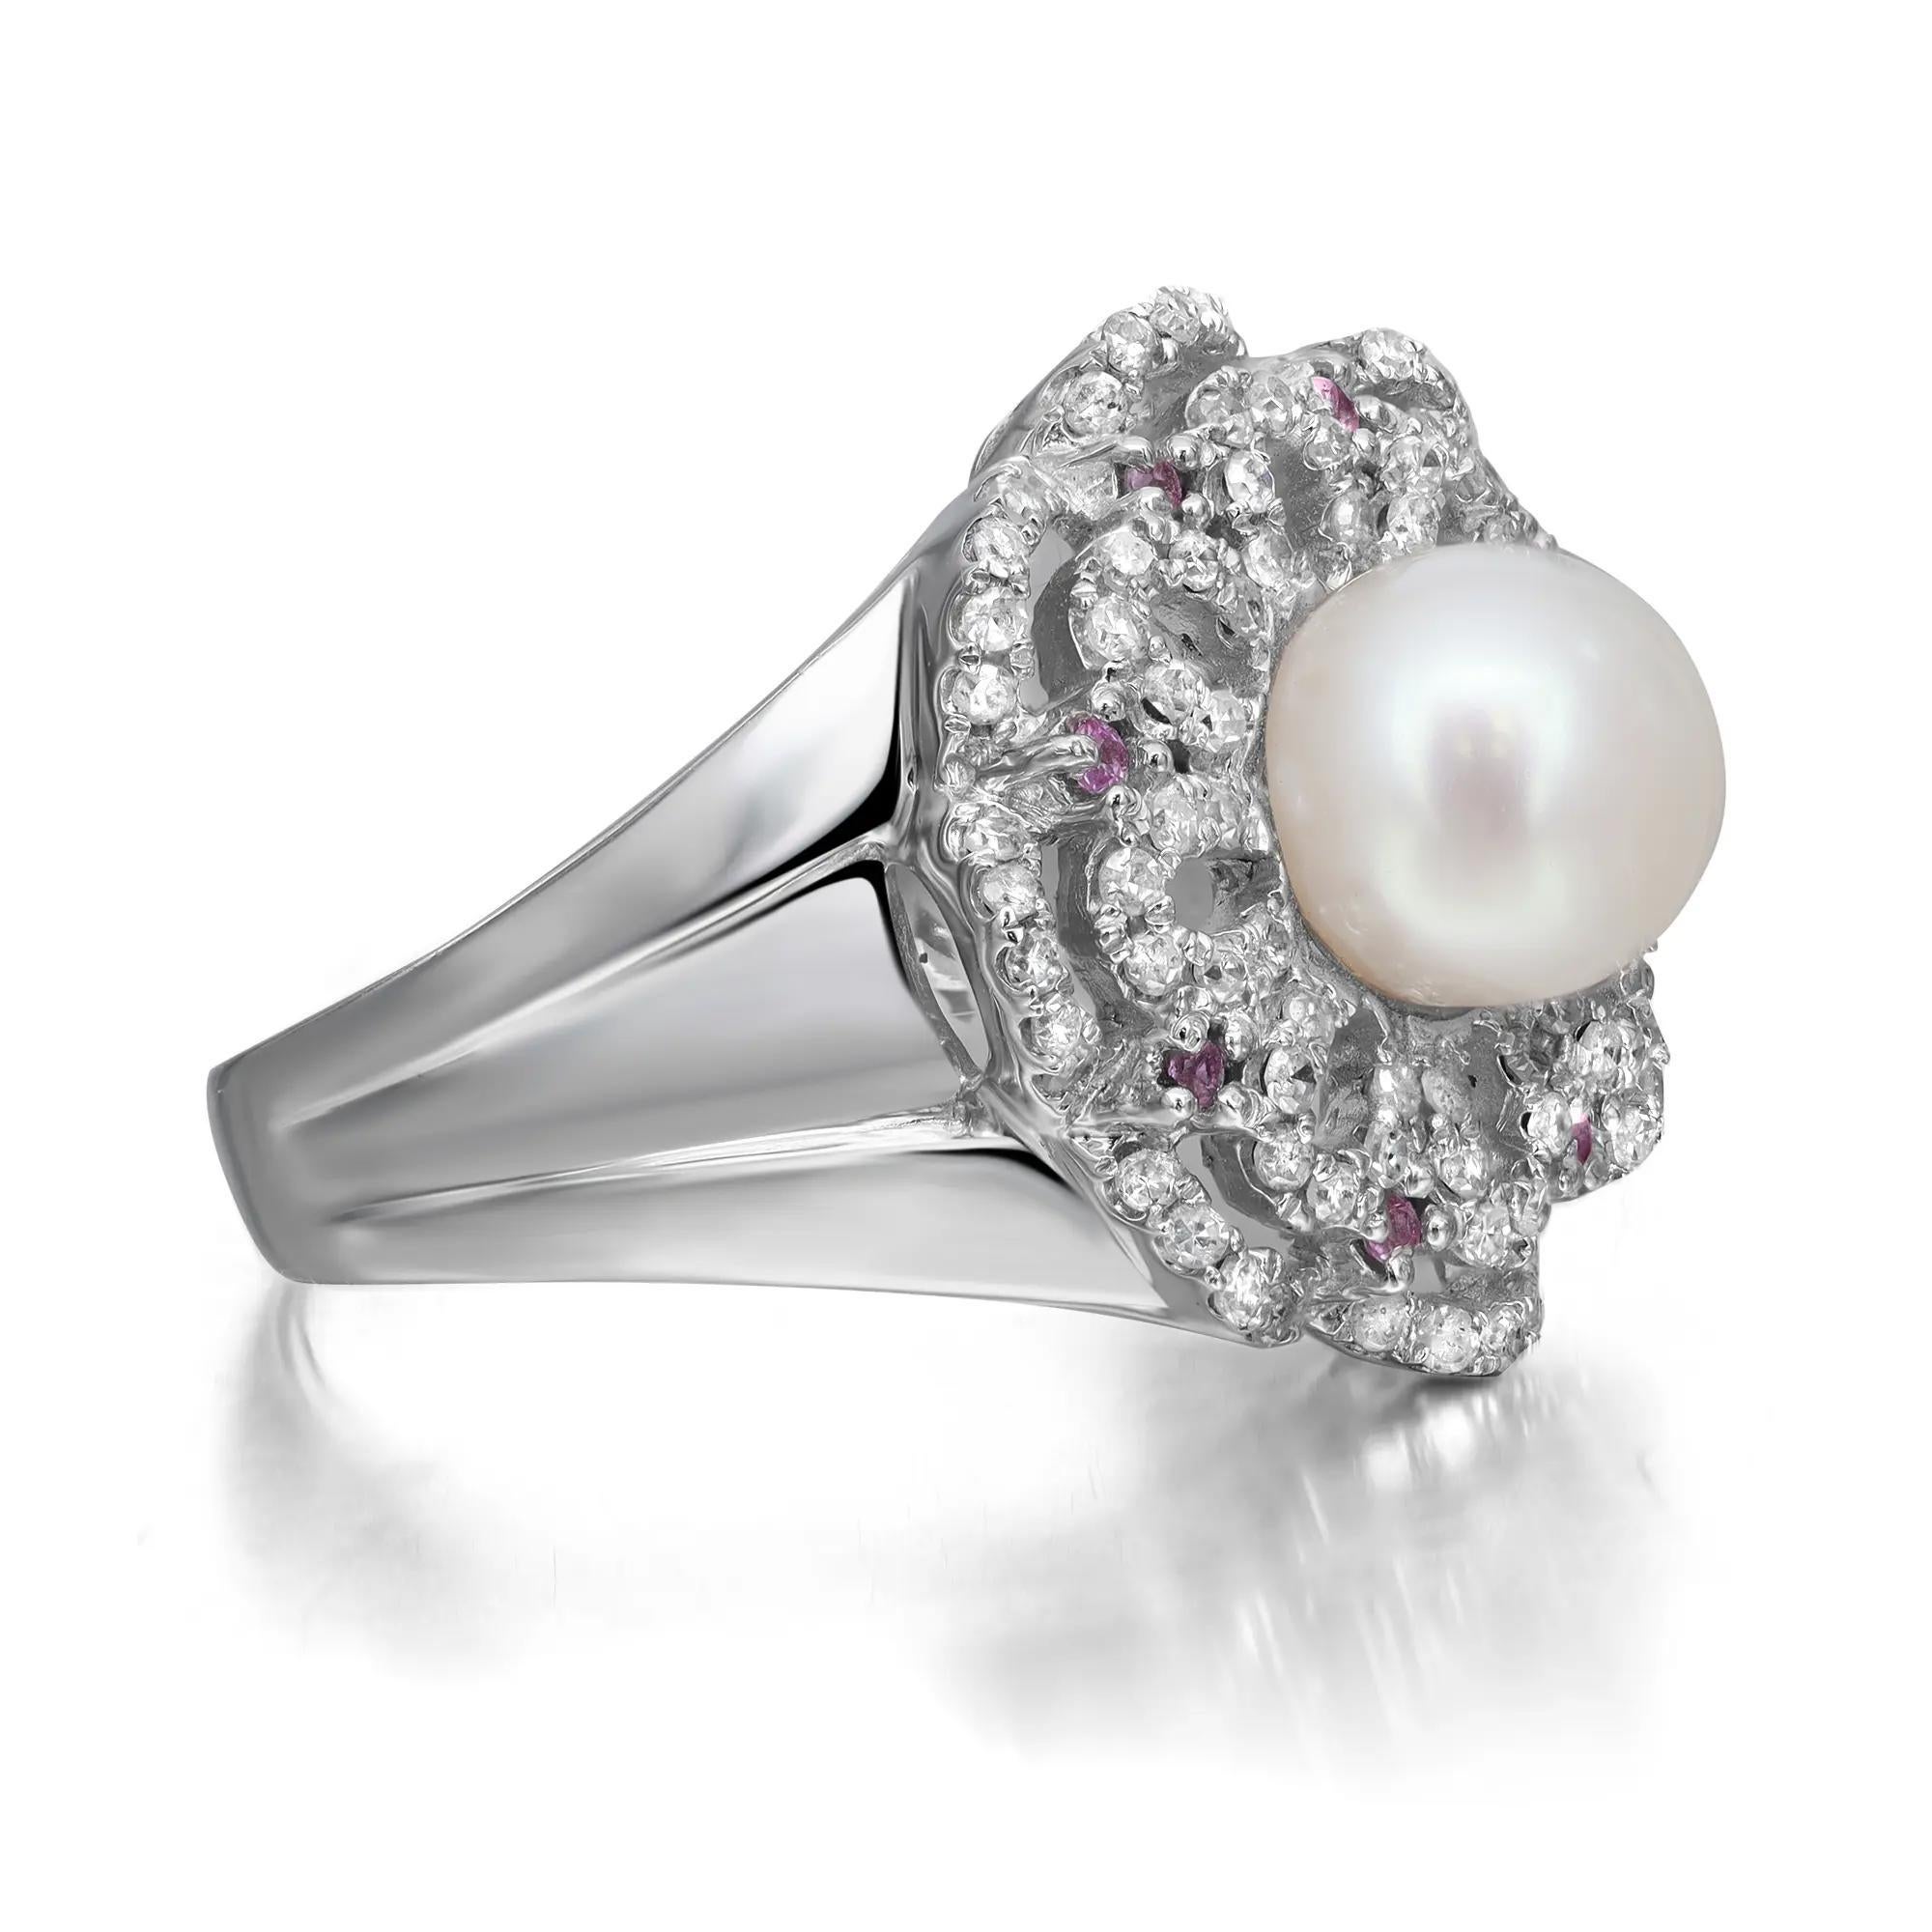 Magnificent ladies cocktail ring. This ring is centered by a beautiful round white pearl. Accentuated with round cut diamonds in a flower pattern weighing 0.56 carat with round cut pink sapphires. Mounted in fine 14k white gold. Handcrafted